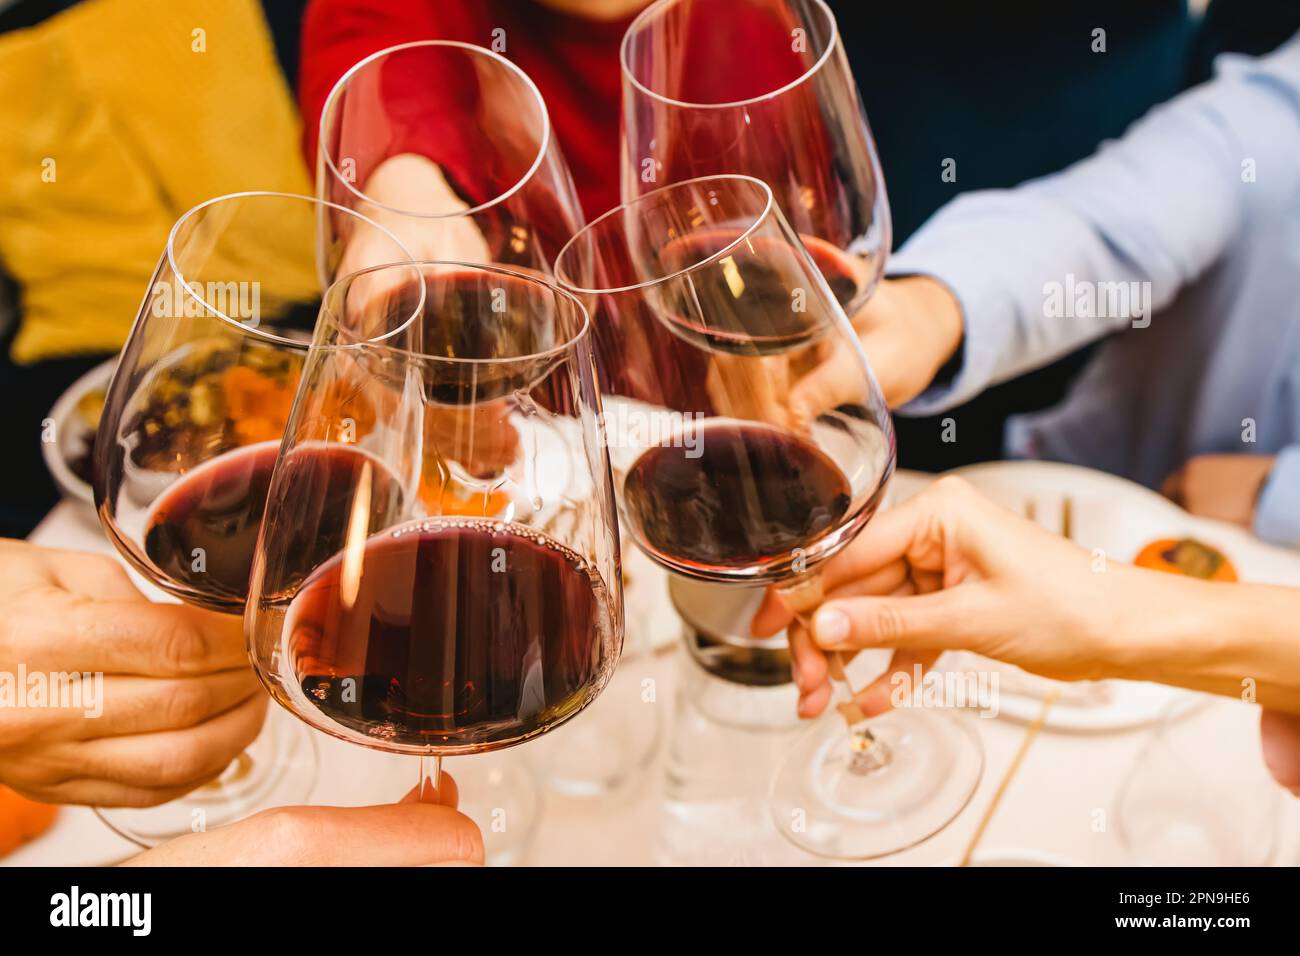 Hands clinking with a glasses filled with red wine sitting at the Thanksgiving dinner table. Celebration, gather, Friendsgiving Stock Photo